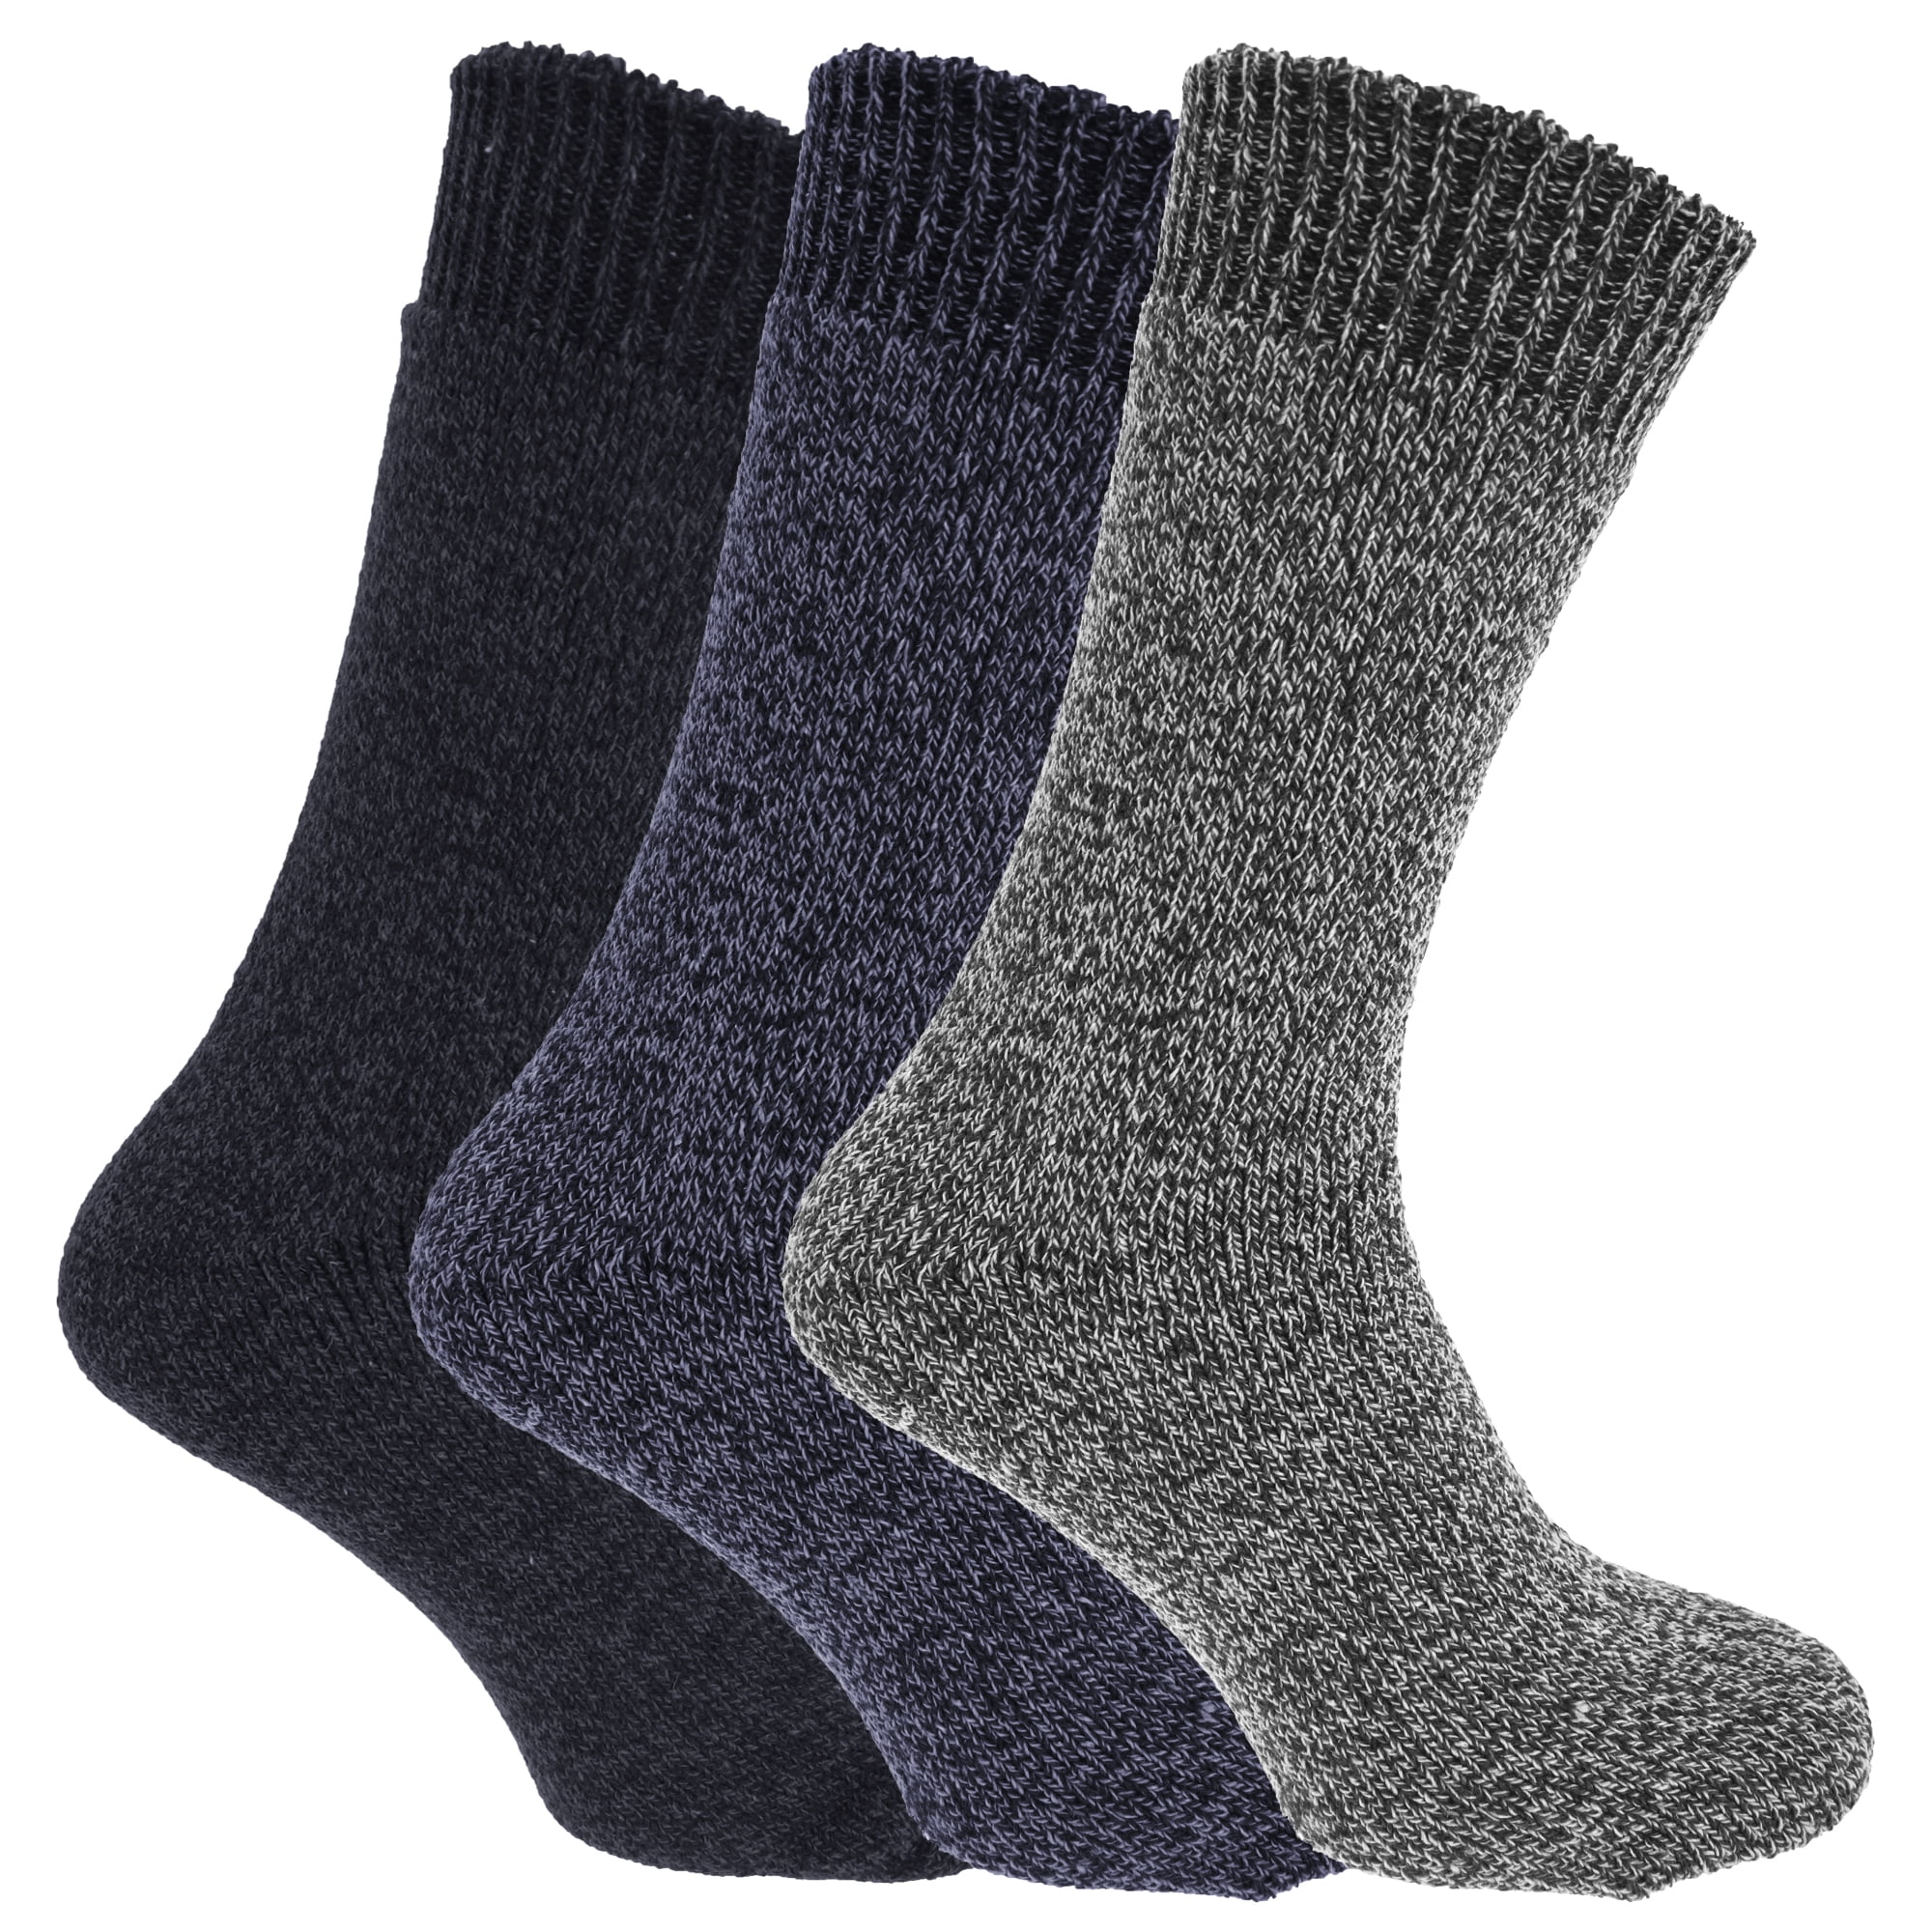 Mens Wool Blend Fully Cushioned Thermal Boot Socks (Pack Of 3 ...